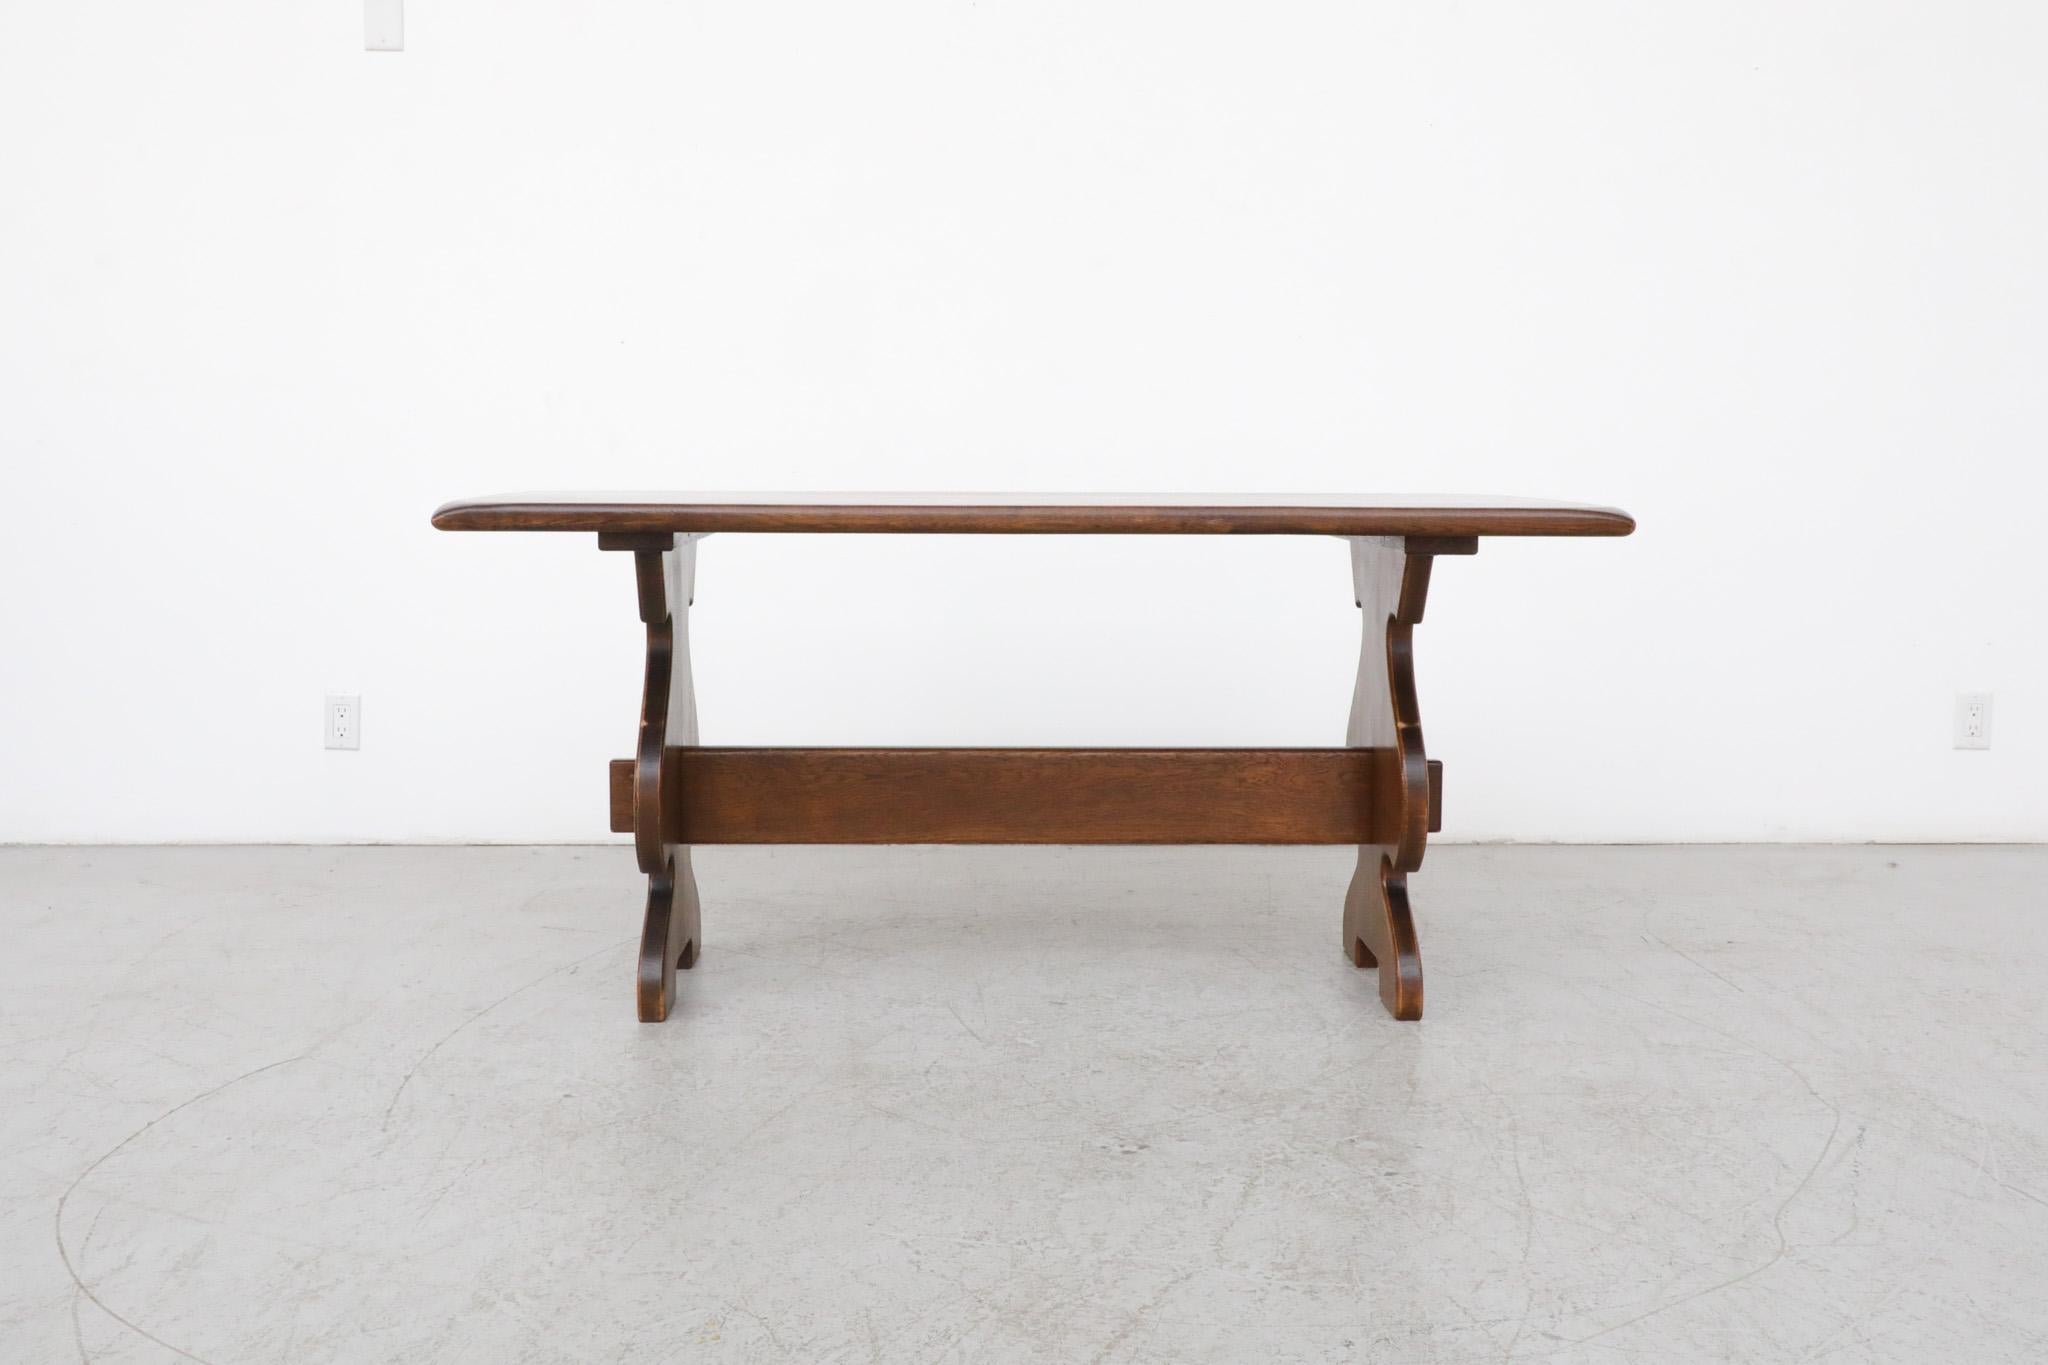 Organically shaped, hand-carved, heavy oak dining table or desk with decoratively hewn trestle base. In original condition with some visible wear true to its age and use. Similar Göran Malmvall dining set also available & listed separately